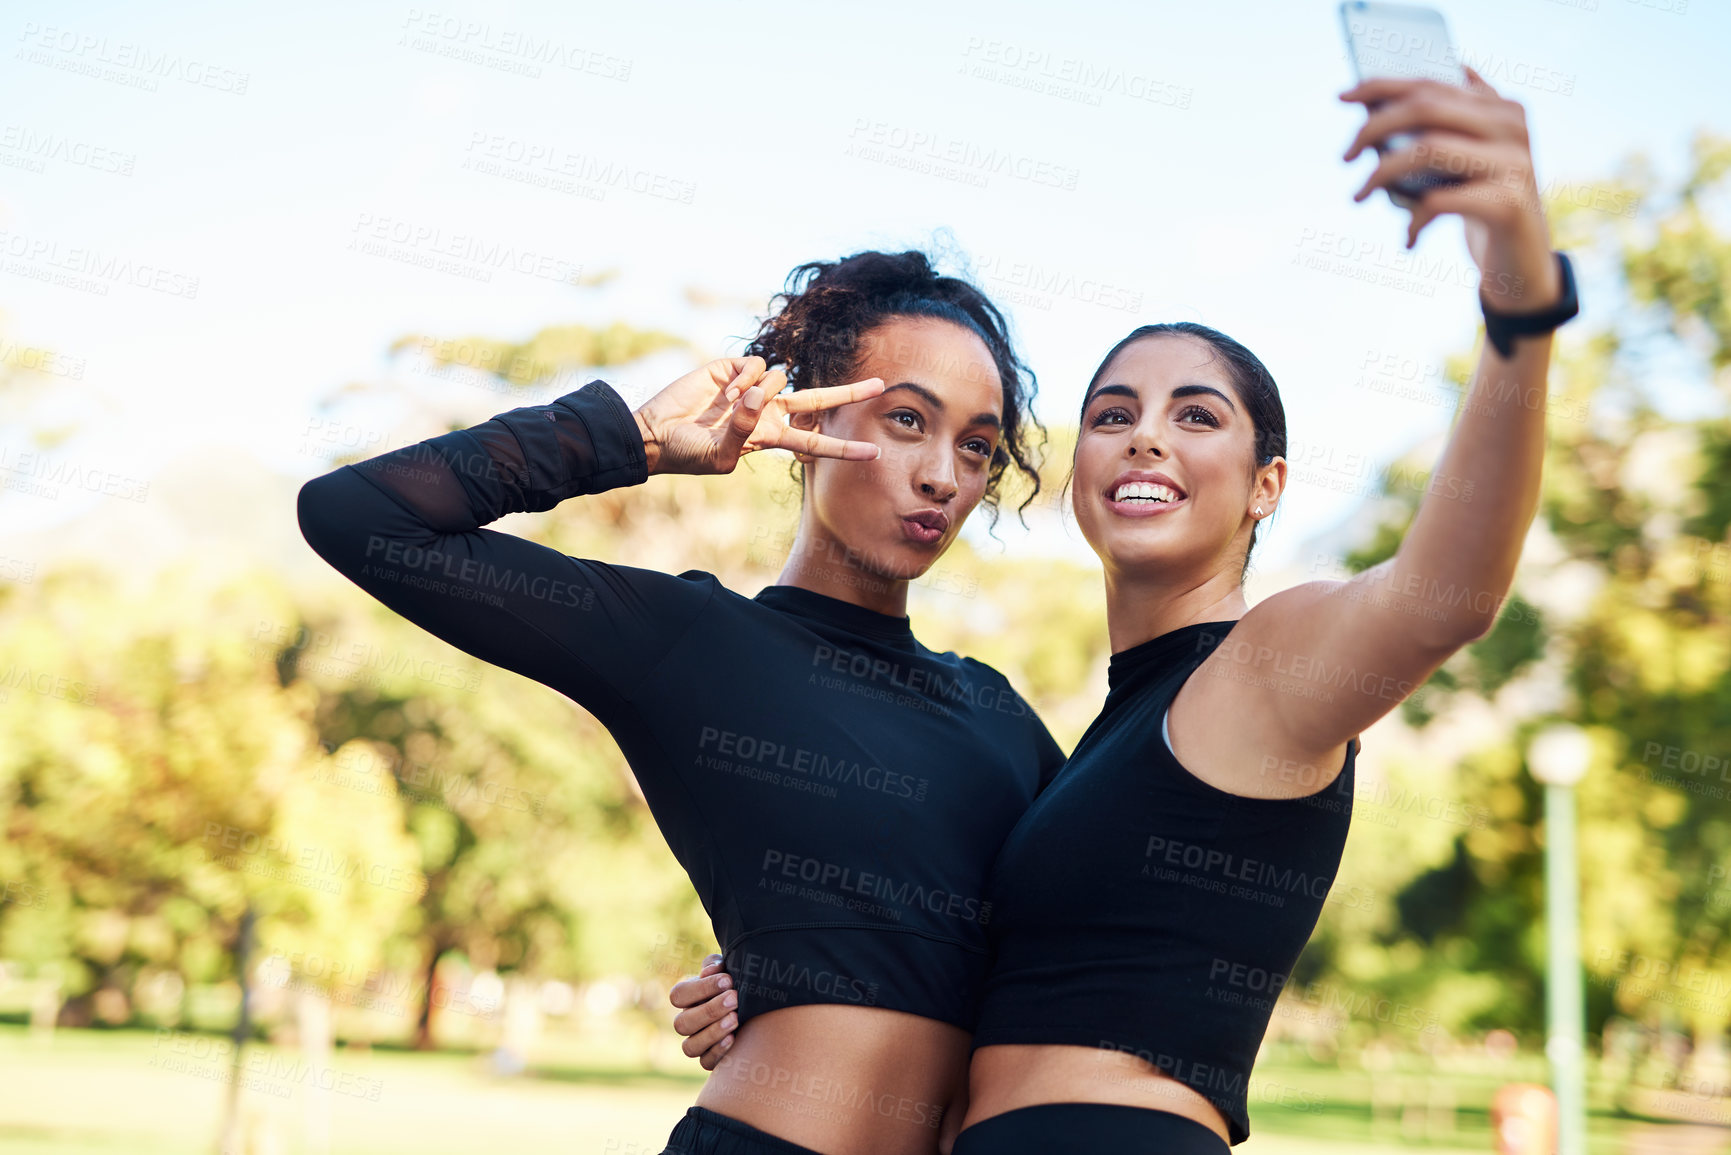 Buy stock photo Cropped portrait of two attractive young women posing for a selfie after their run together in the park